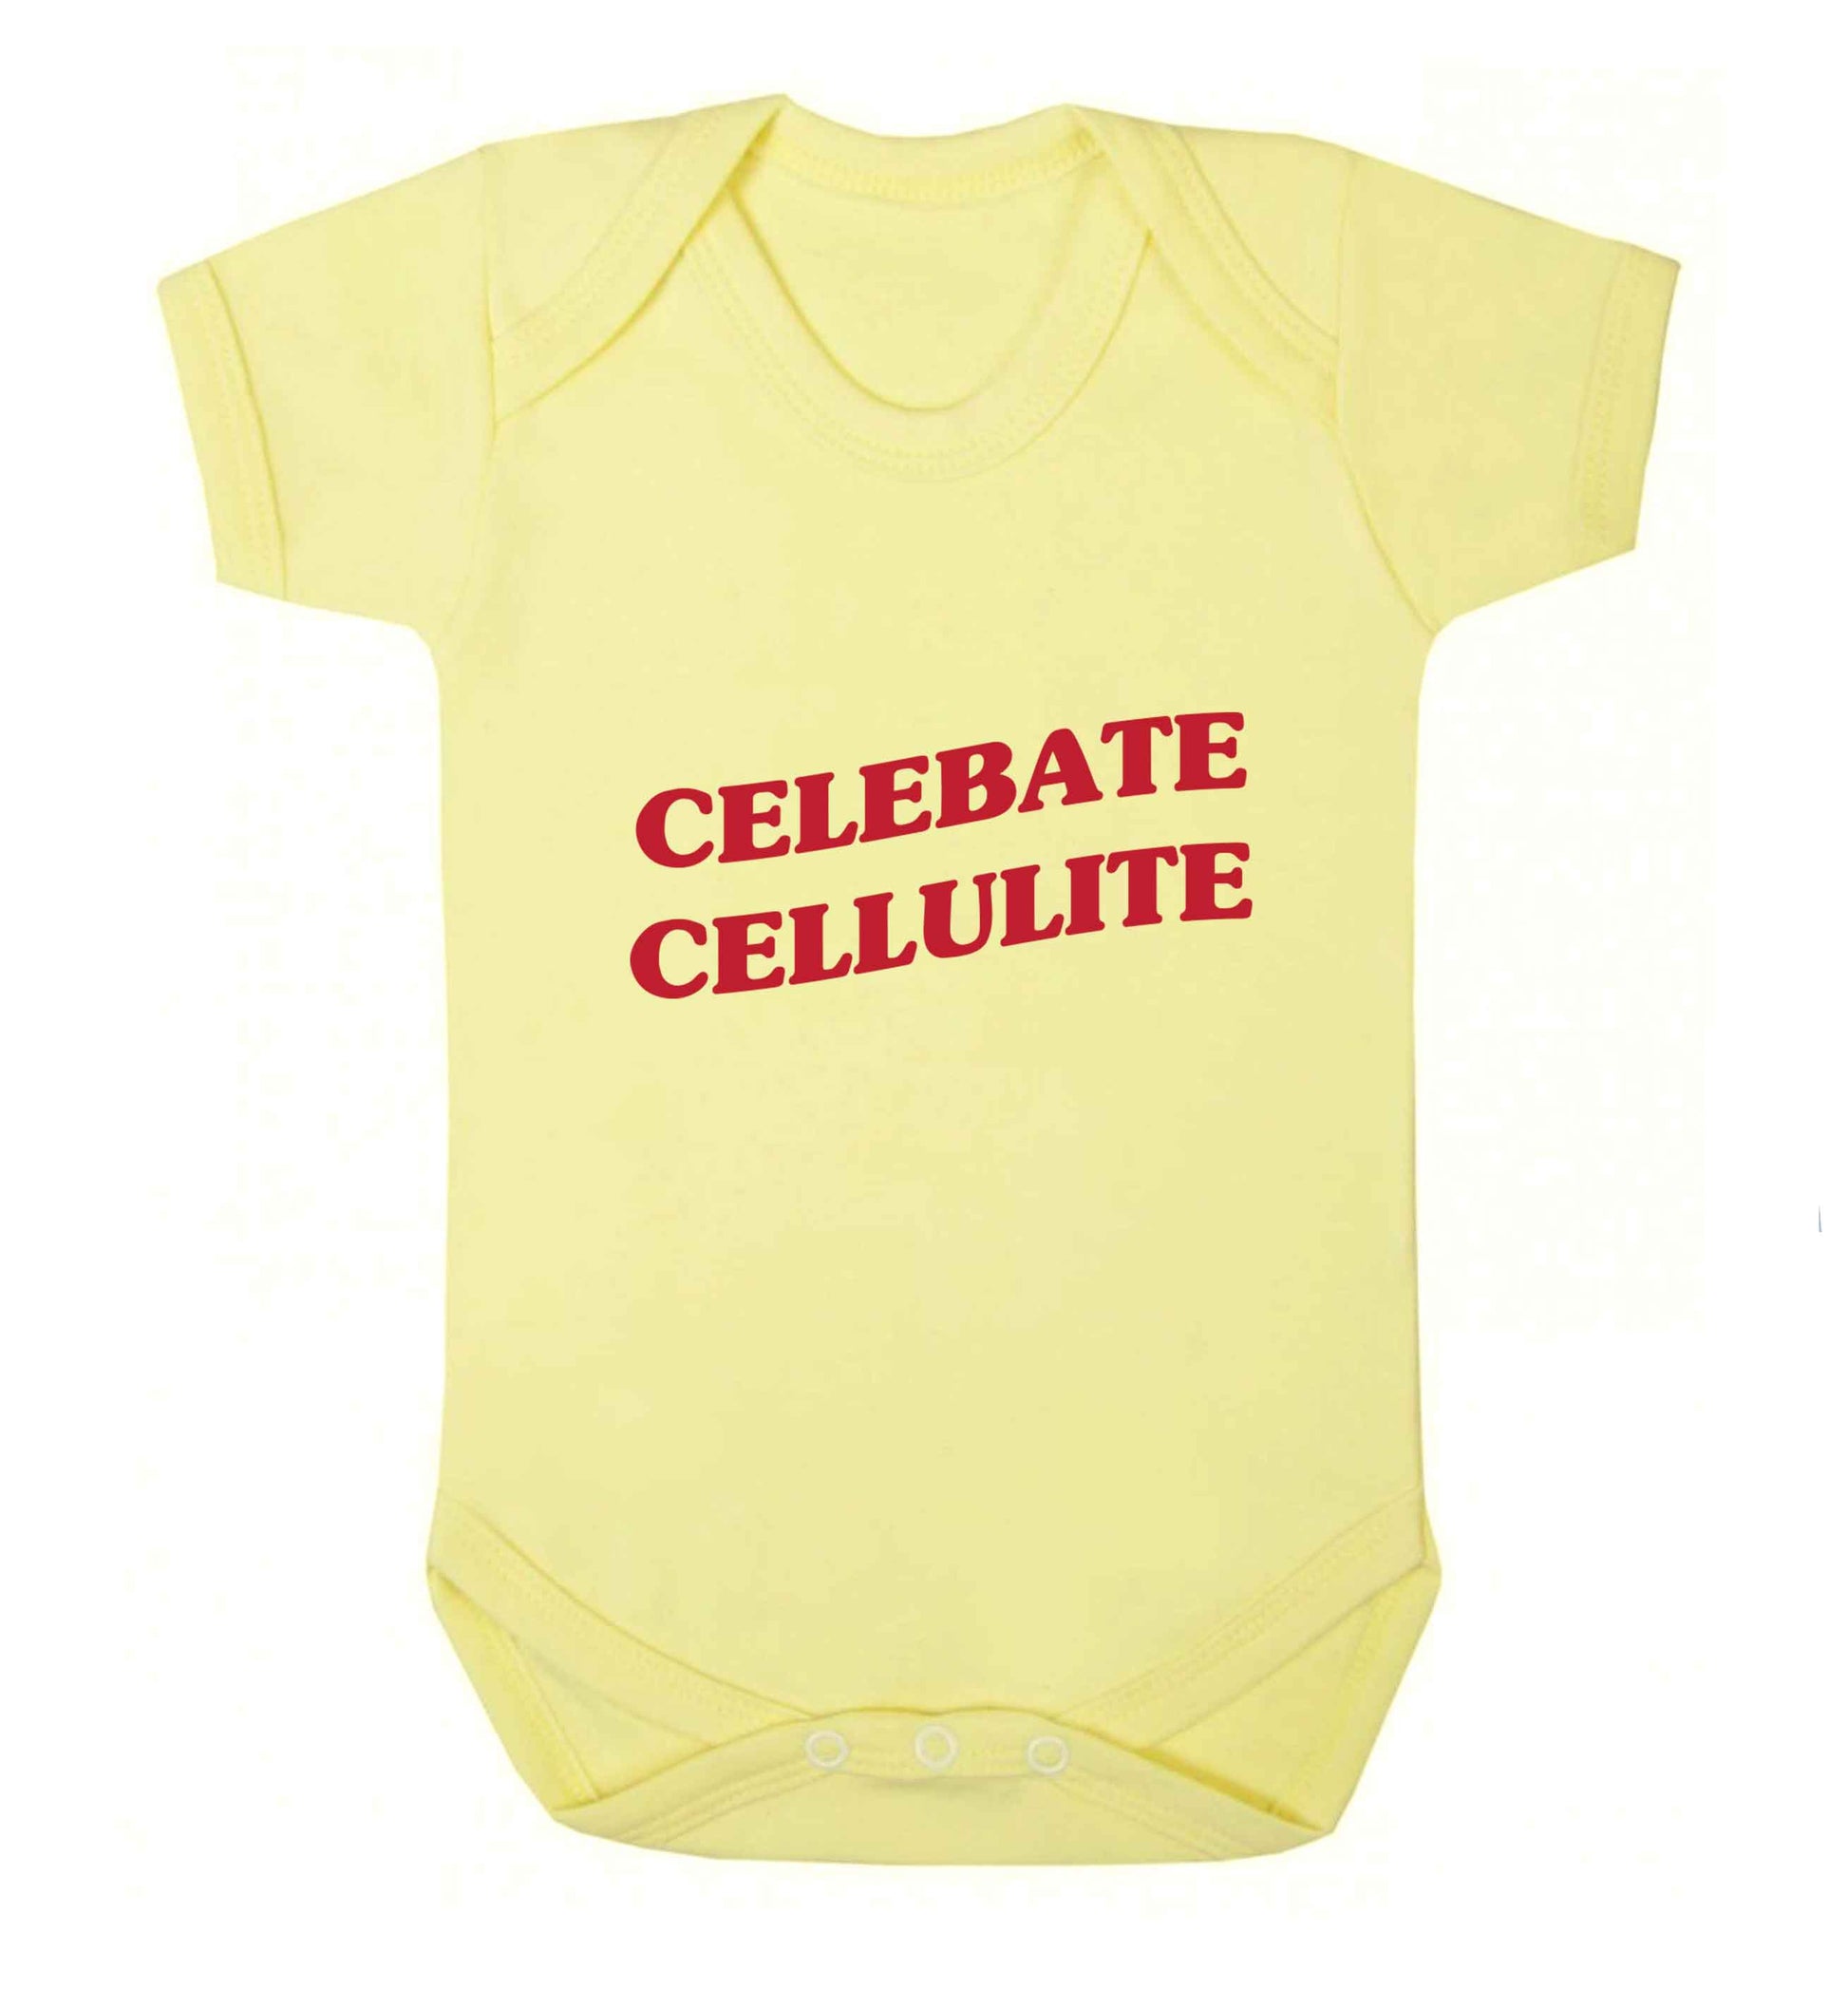 Celebrate cellulite baby vest pale yellow 18-24 months